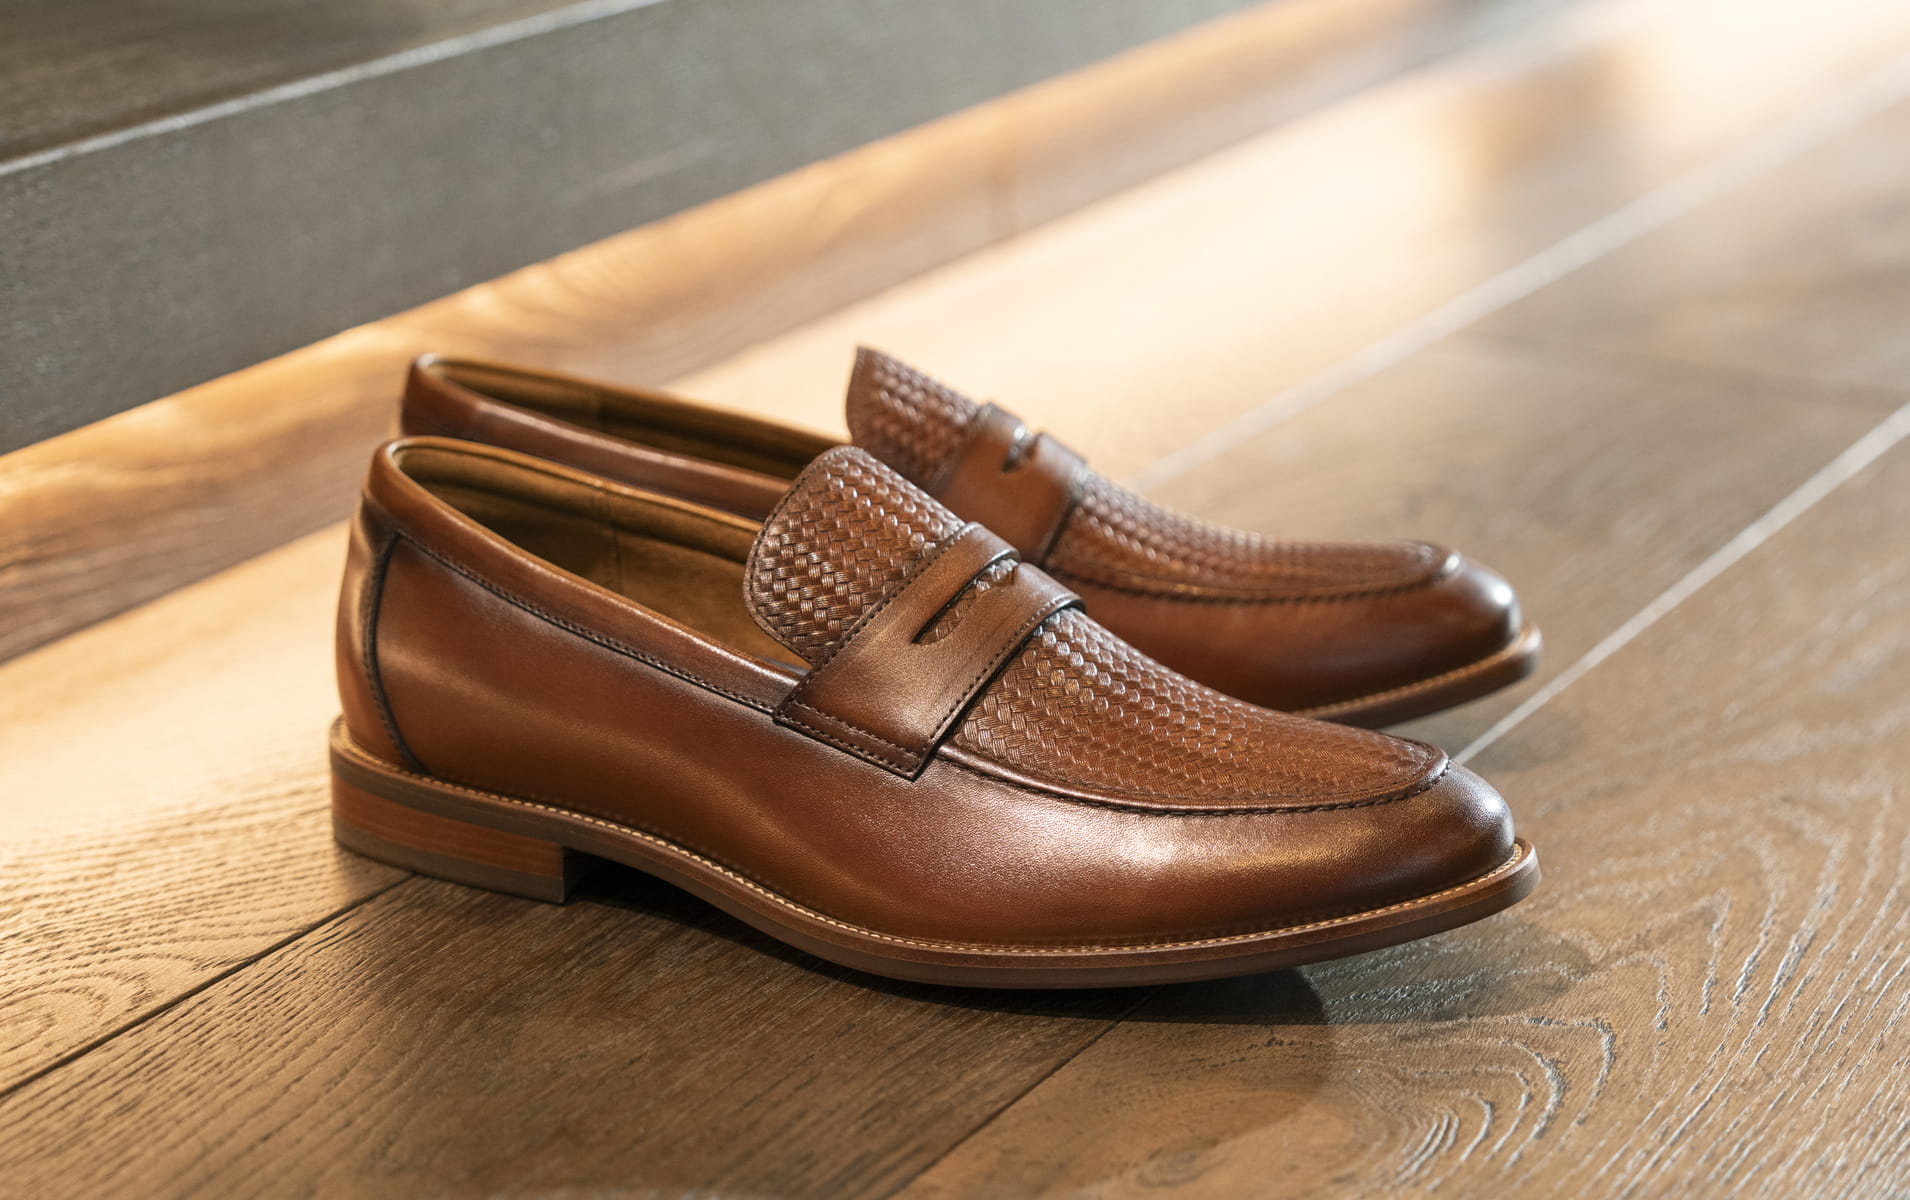 Click to shop Florsheim dress. Image features the Rucci weave loafer in cognac.